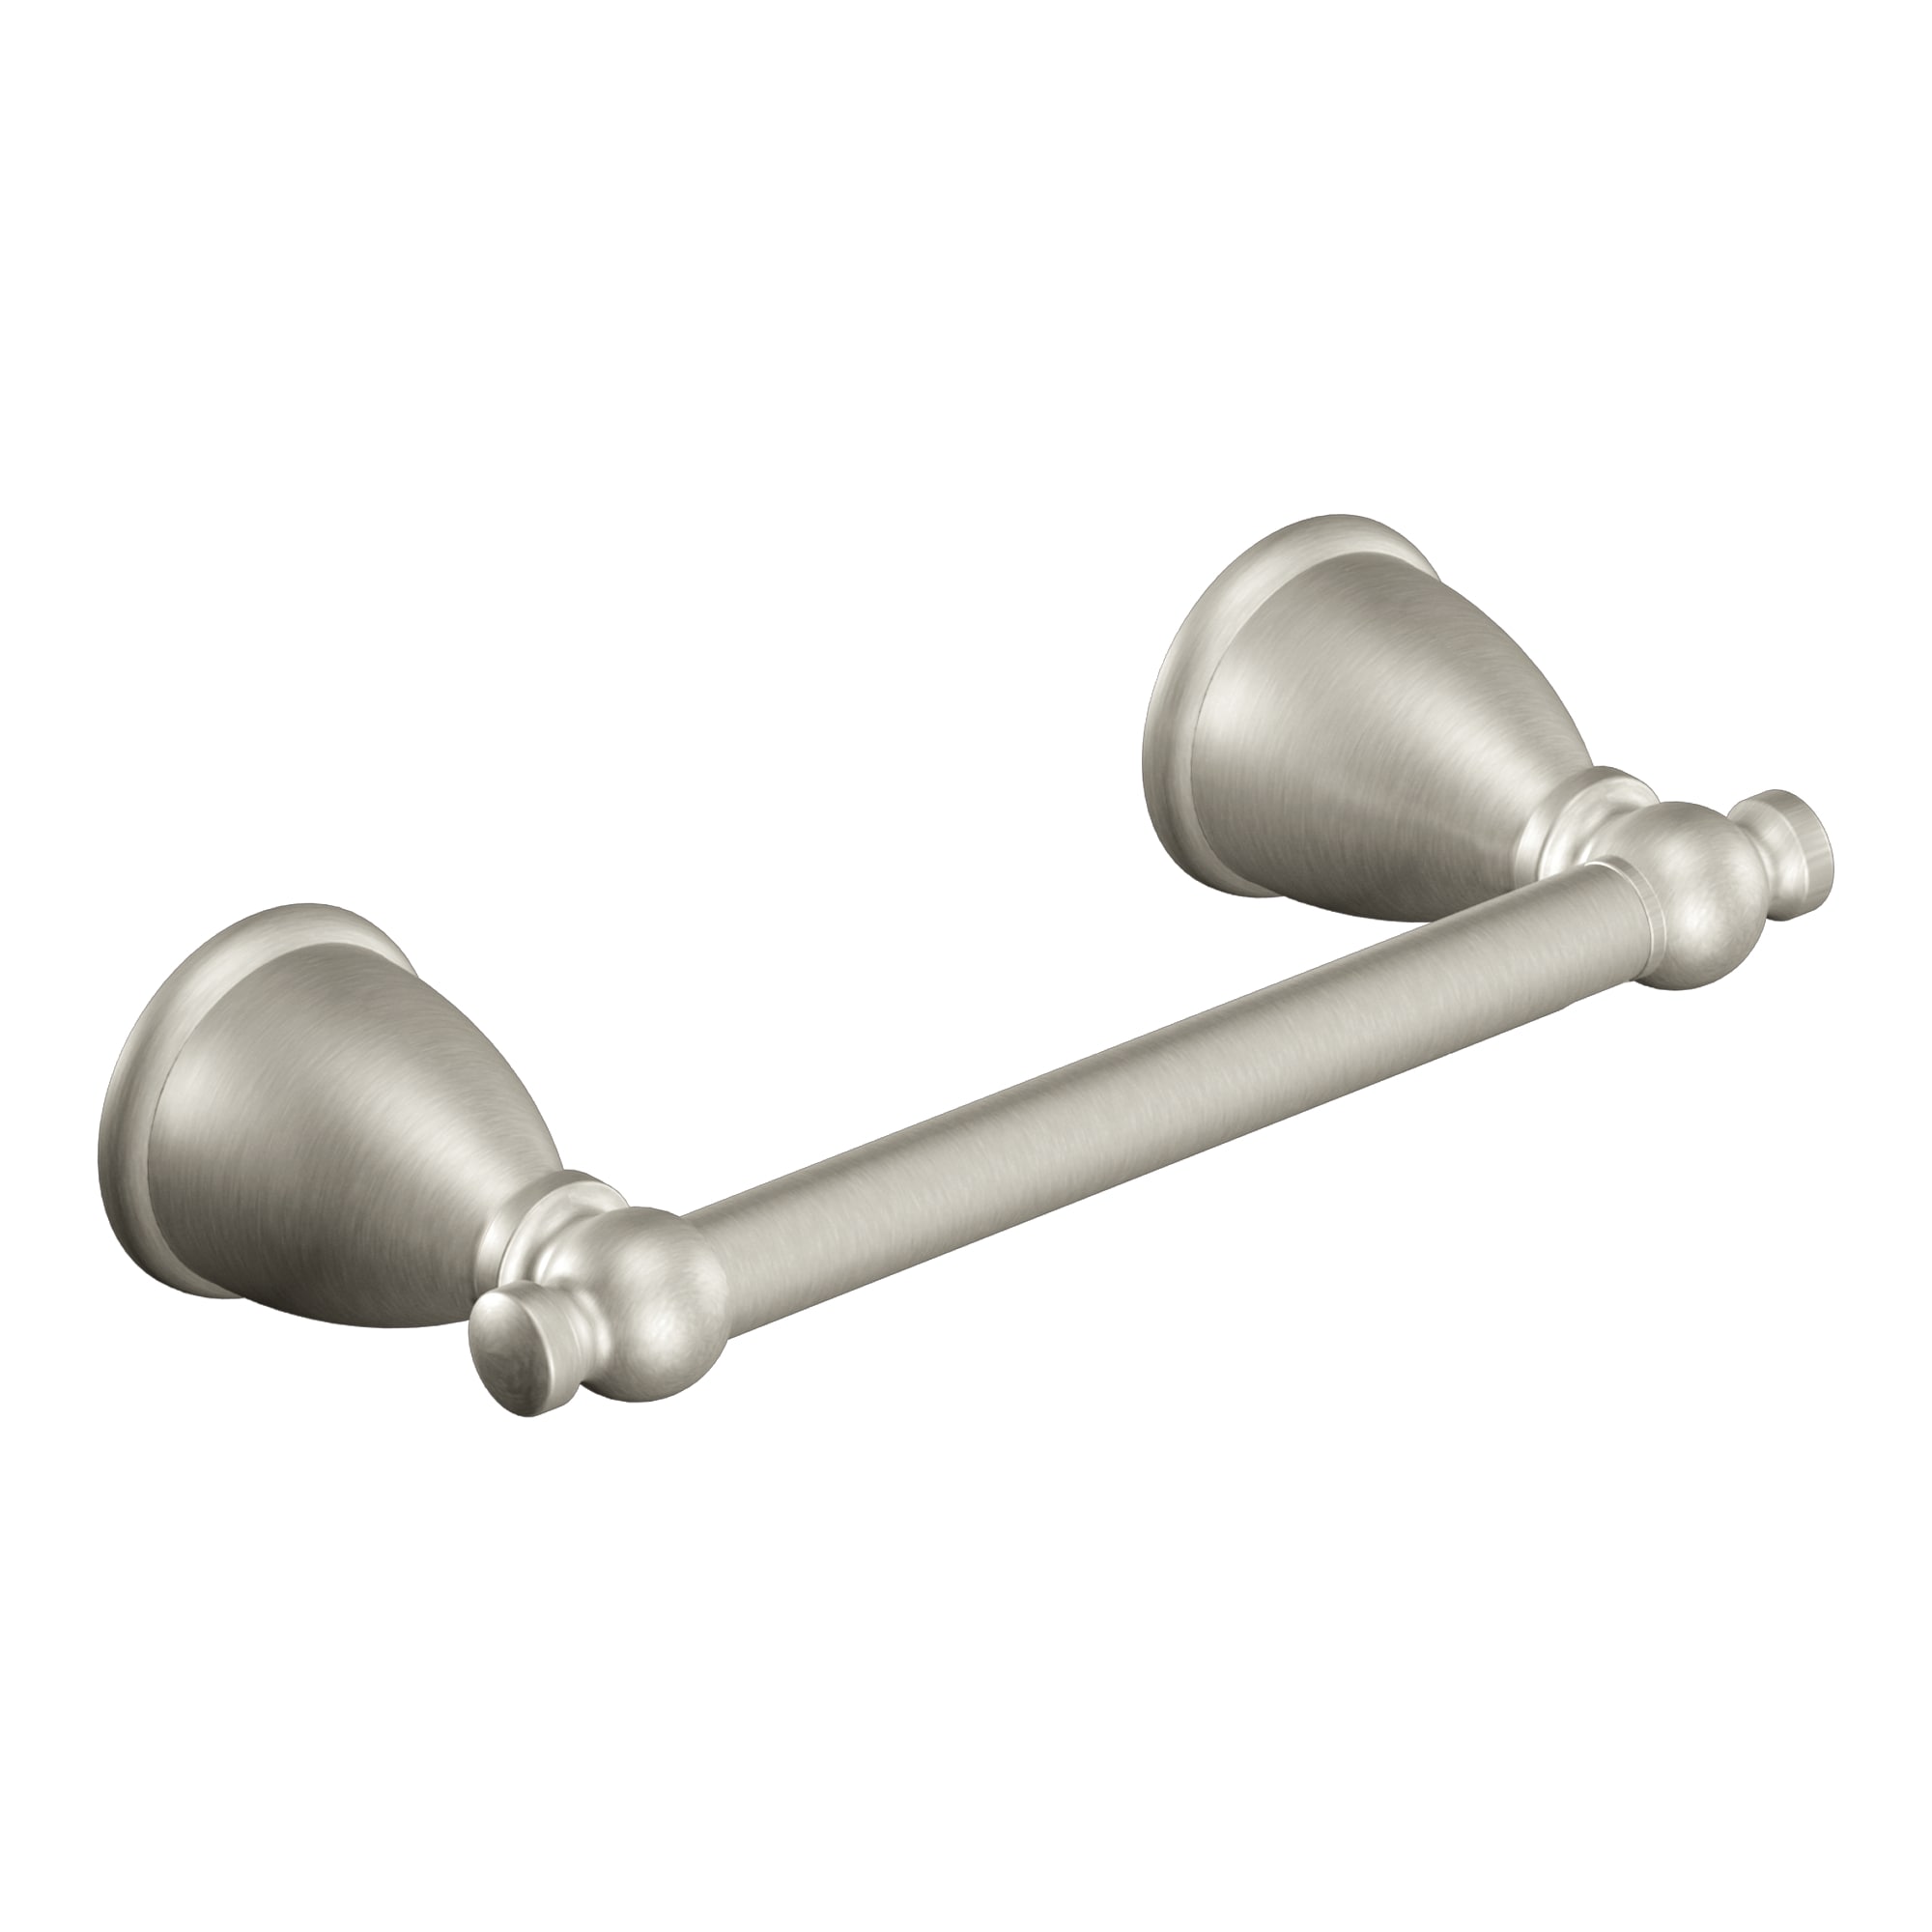 Signature Hardware 295812 Albury Collection Wall-Mount Toilet Paper Holder Finish: Brushed Nickel